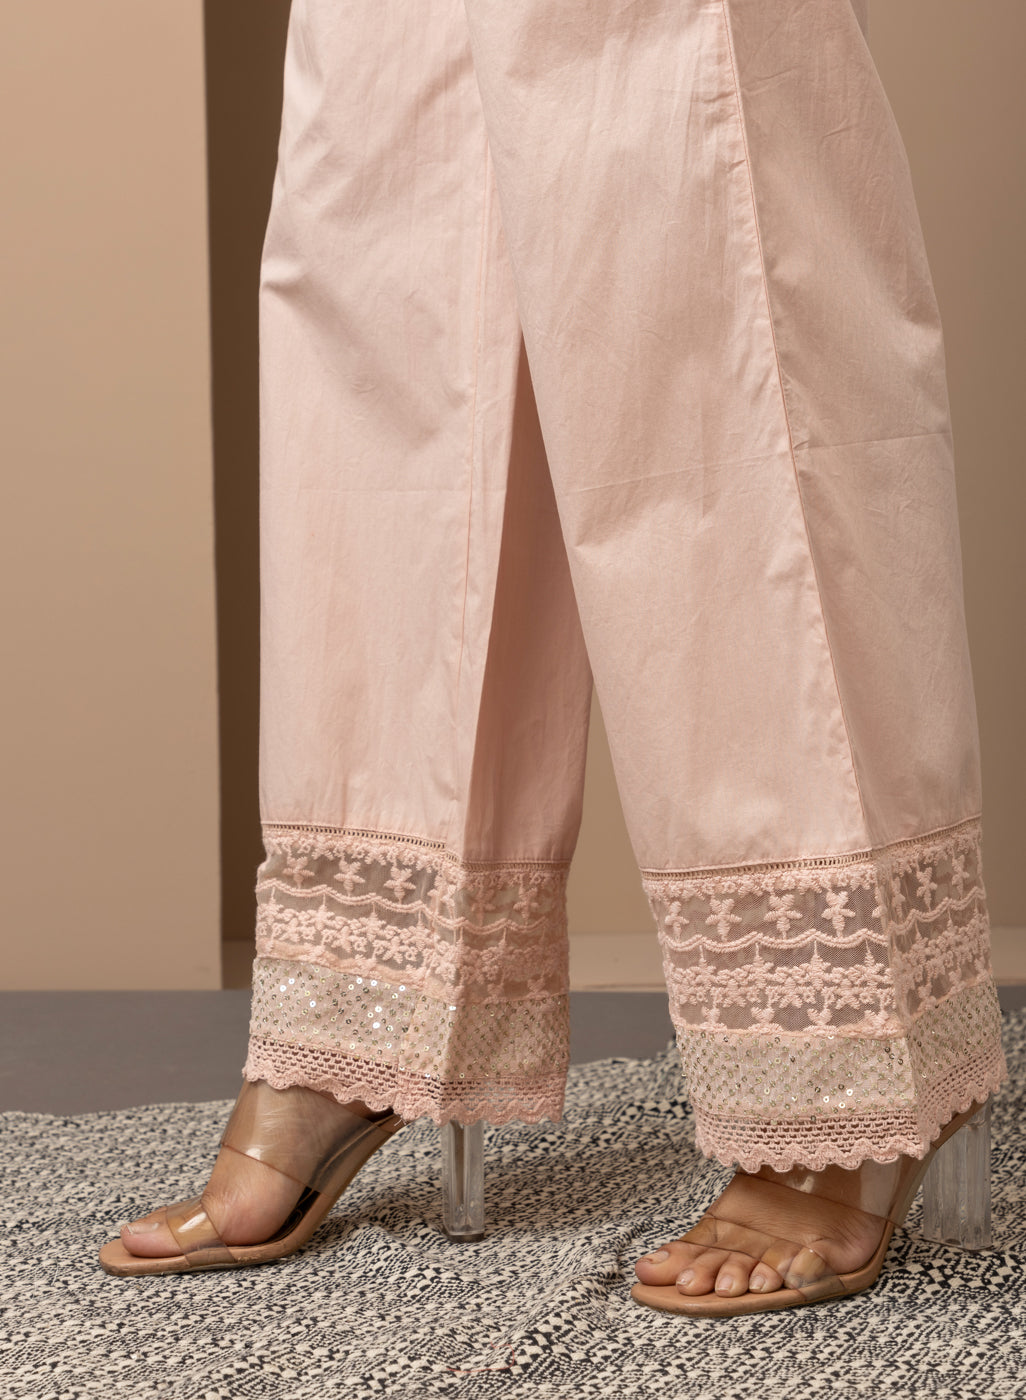 Pink Palazzos With Shimmery Details At The Hems